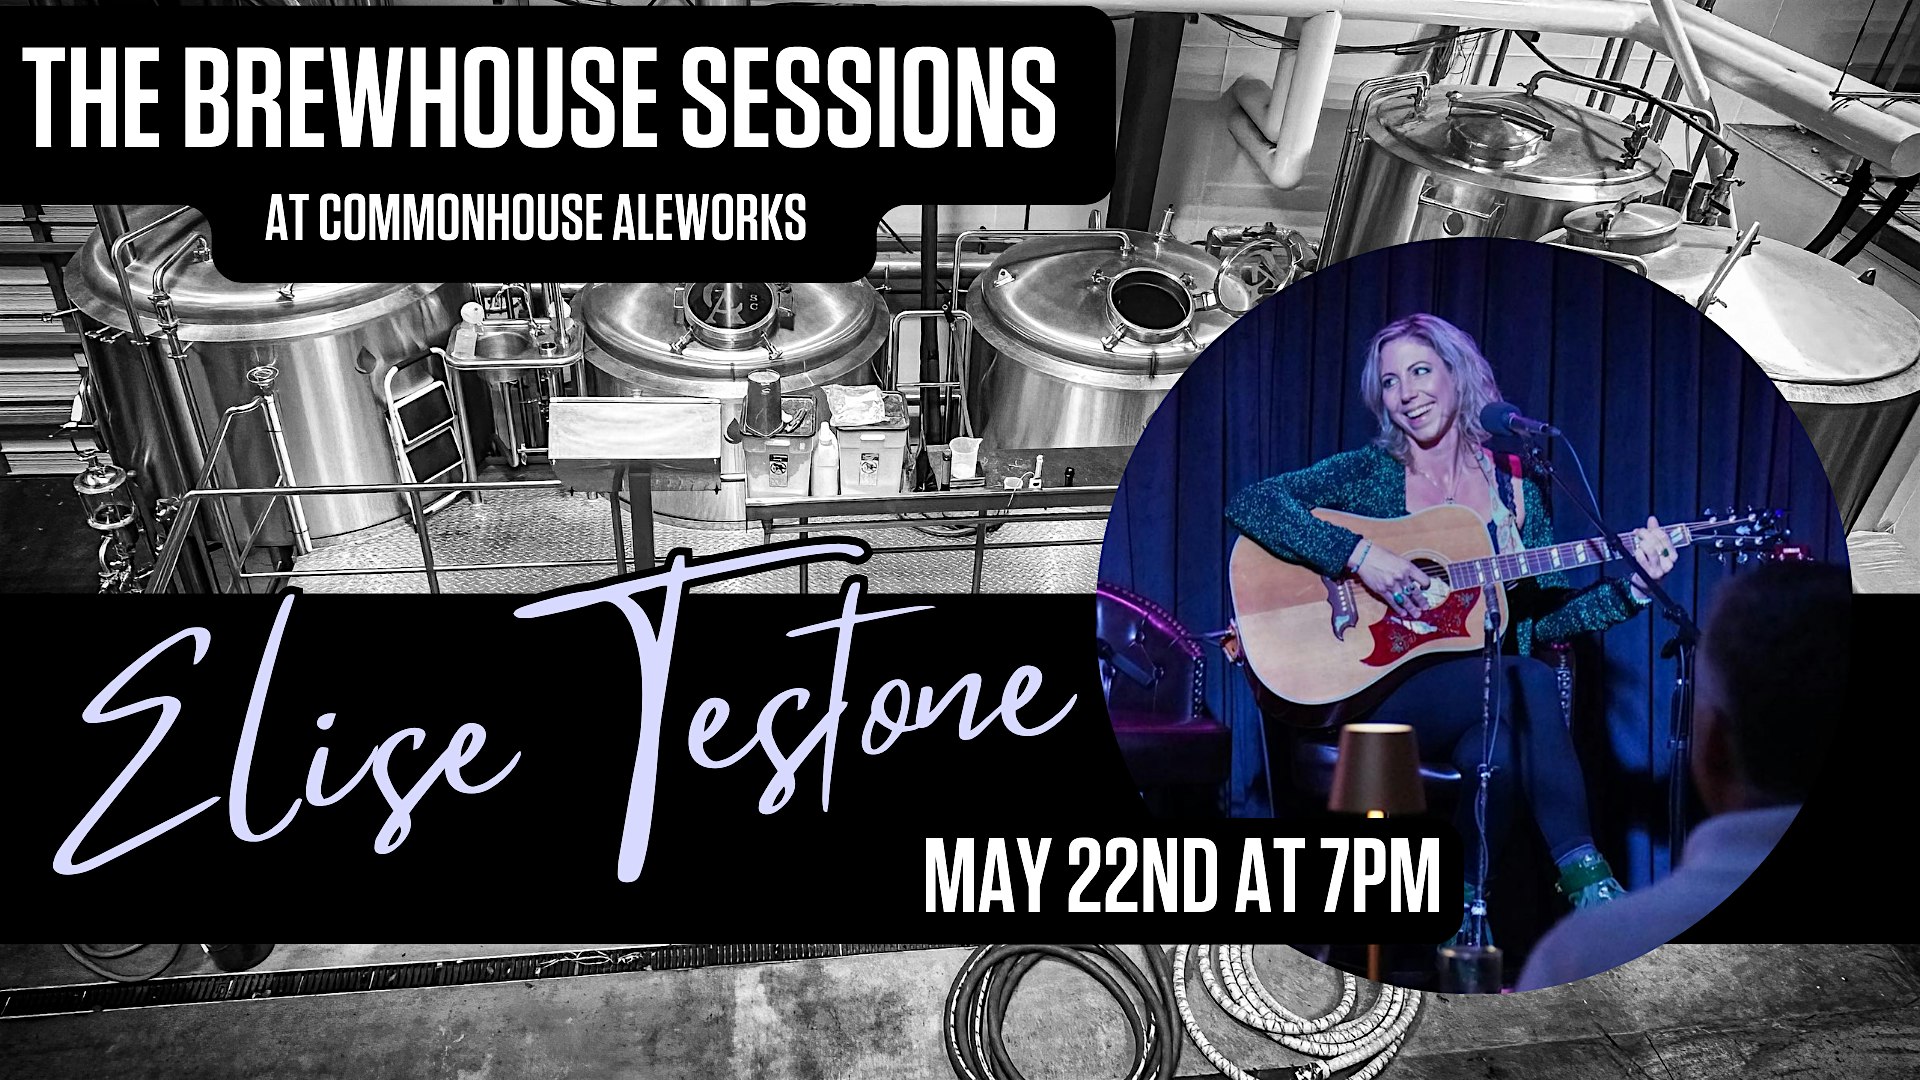 The Brewhouse Sessions with Elise Testone